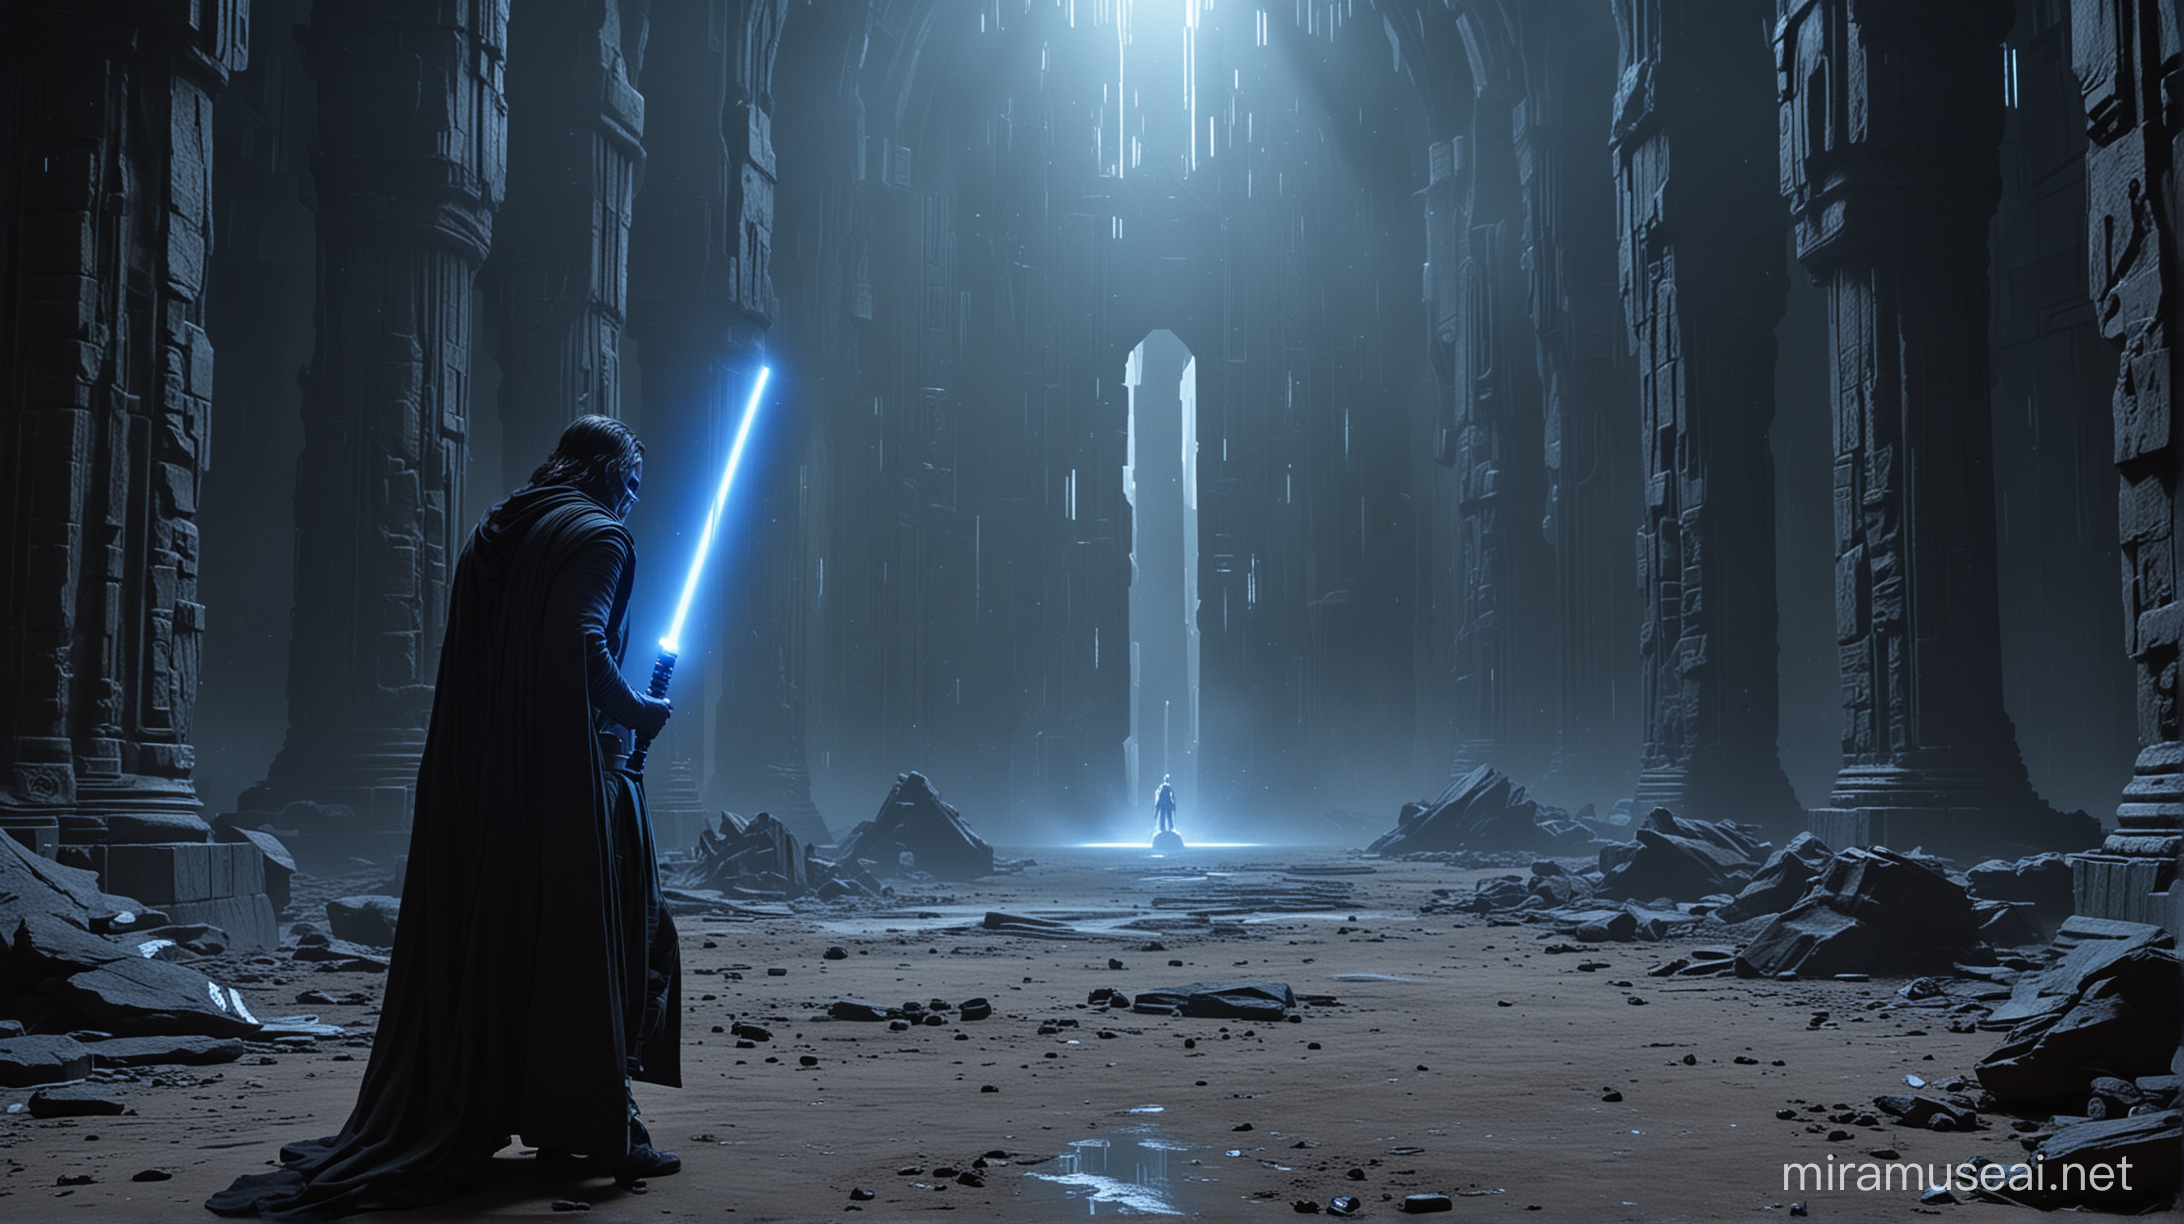 Dark Jedi Searching for Knowledge in Ruined Jedi Temple with Blue Lightsaber